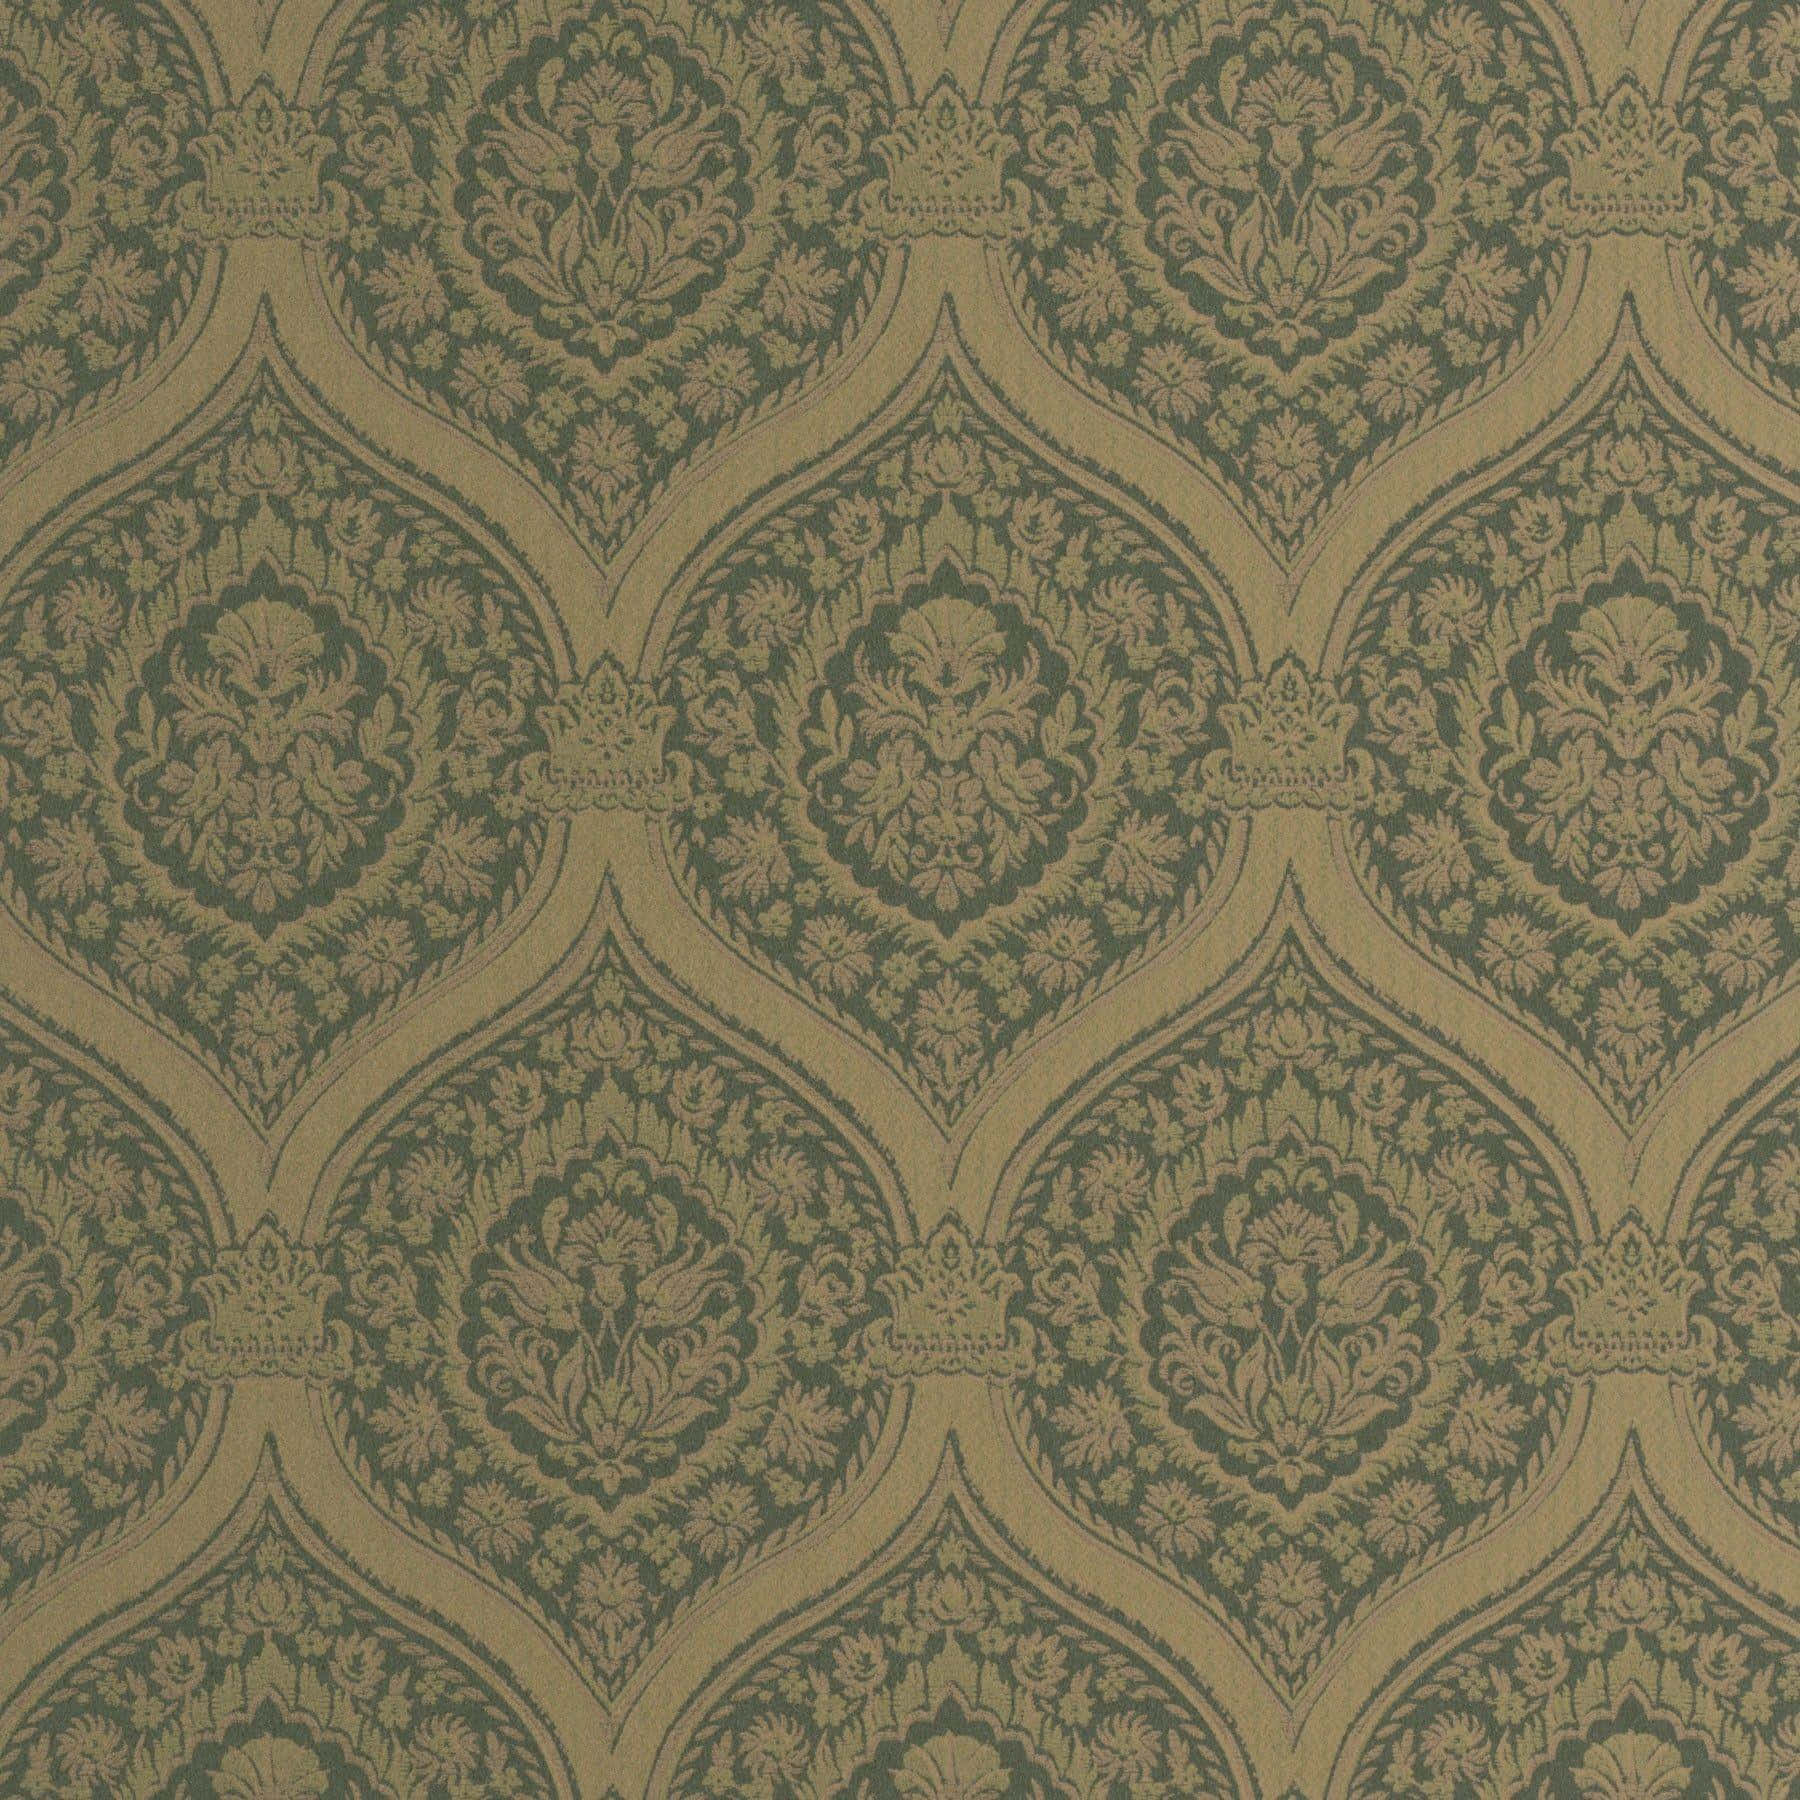 A Wallpaper With A Green And Brown Design Wallpaper